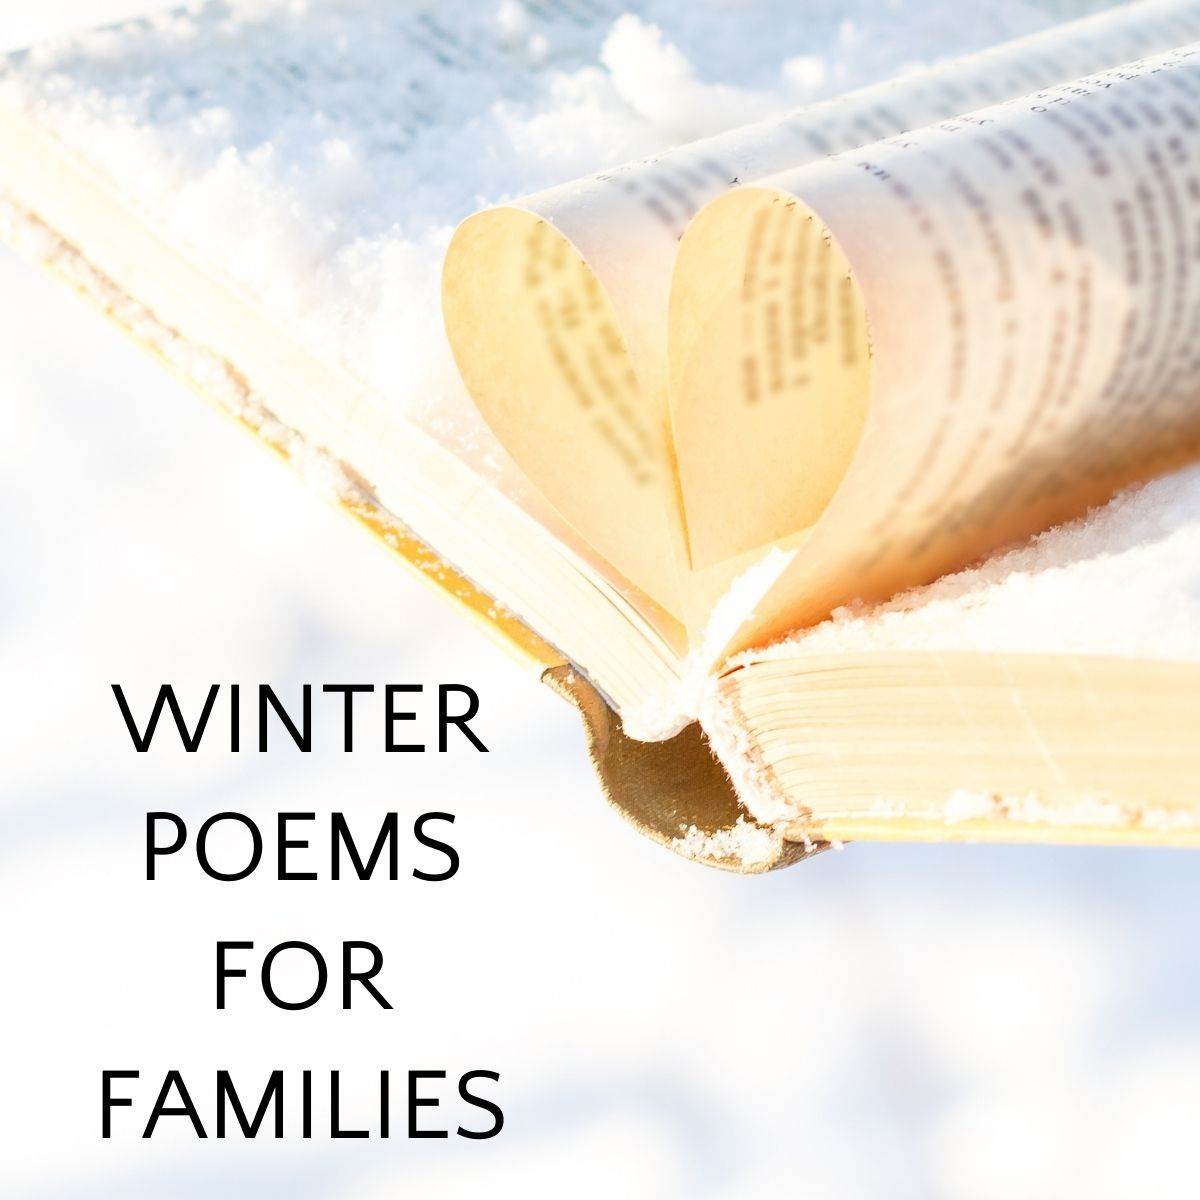 Winter poems for children book in snow